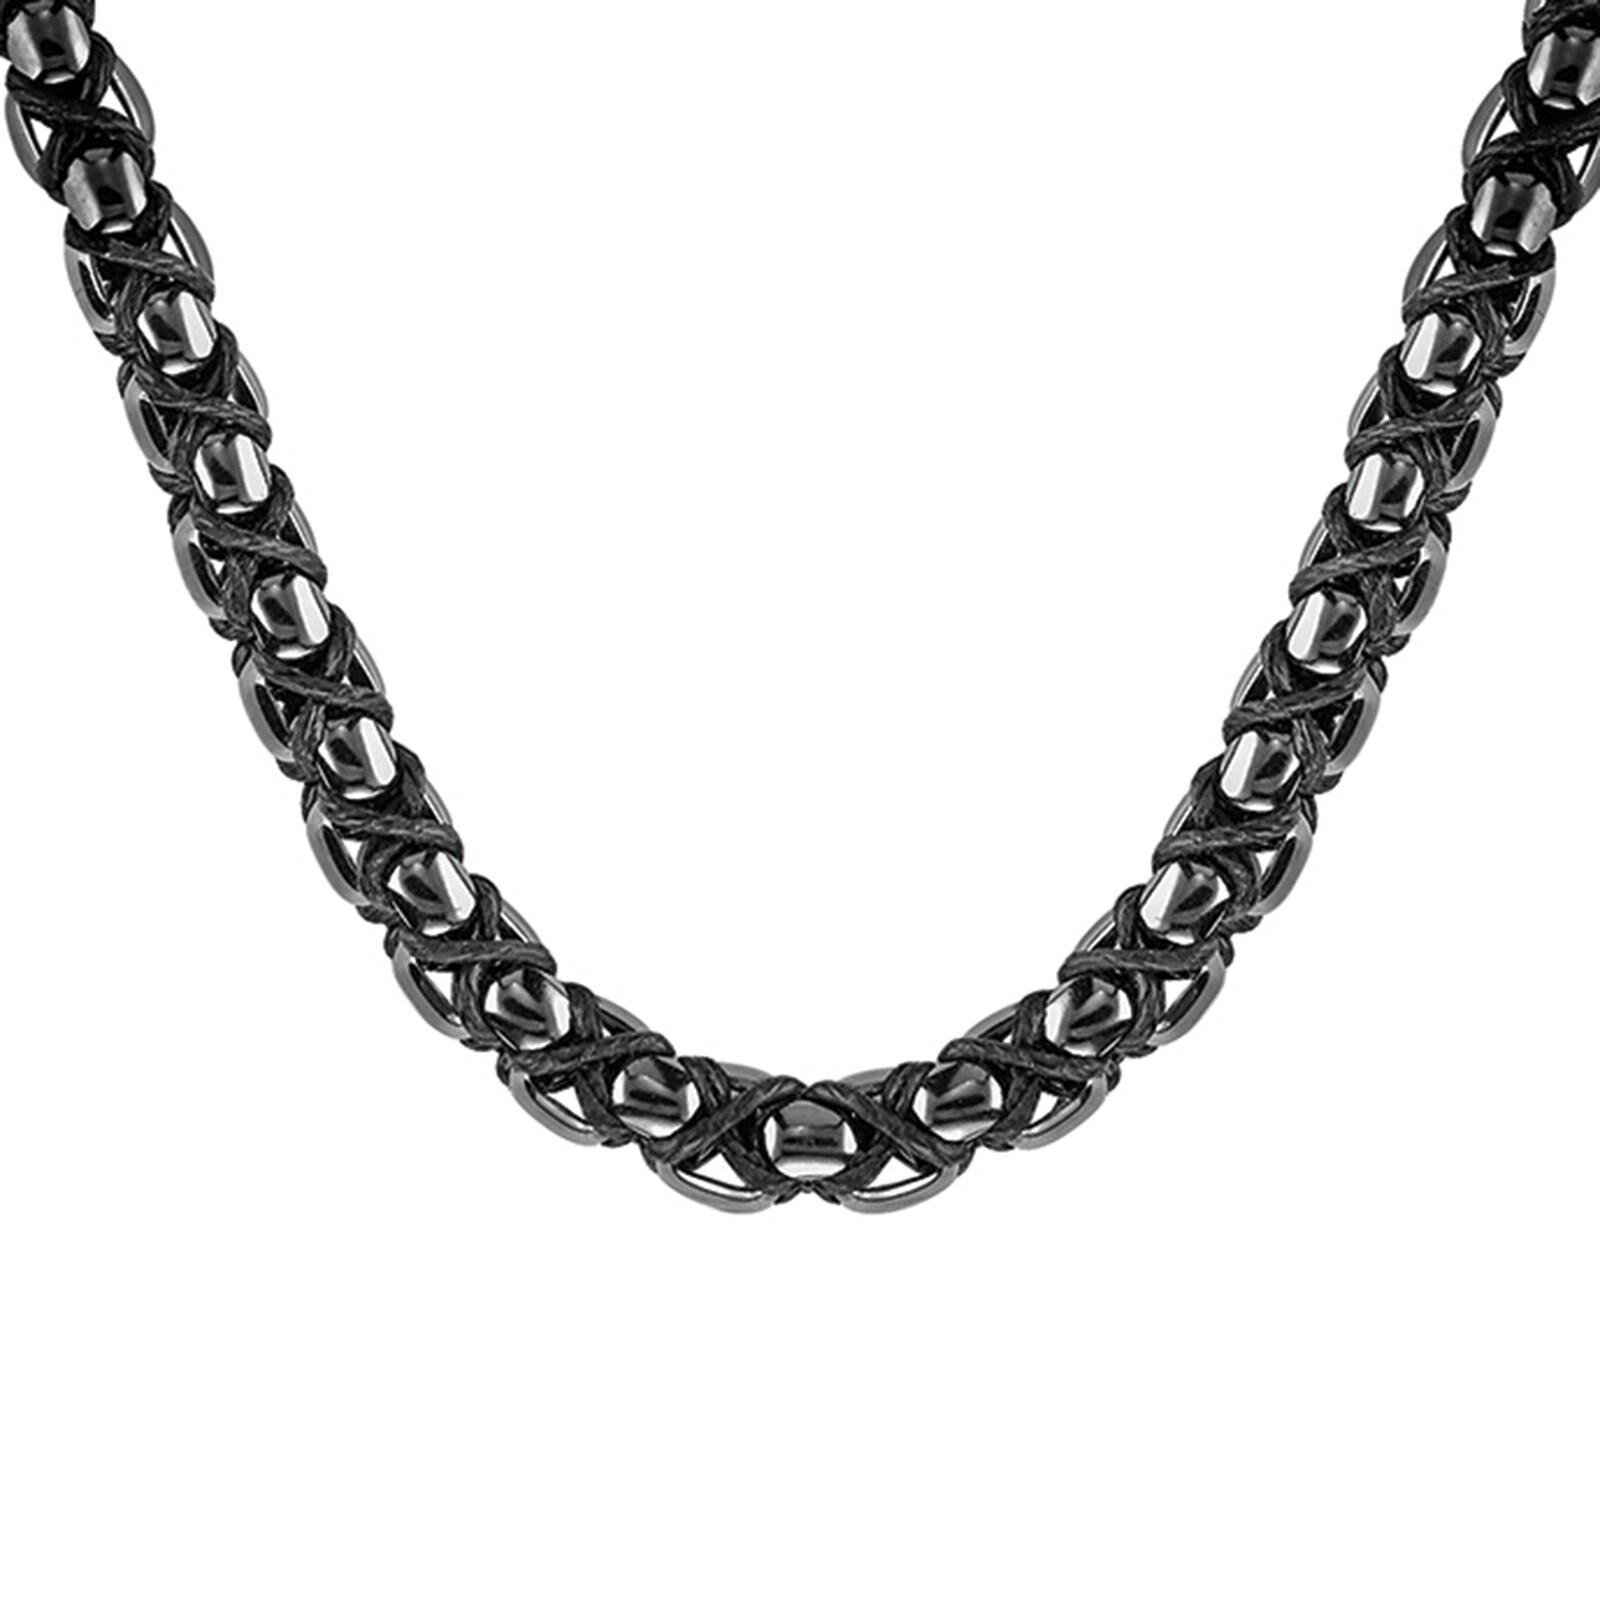 BOSS Chain for Him Men's Necklace | 0129491 | Beaverbrooks the Jewellers